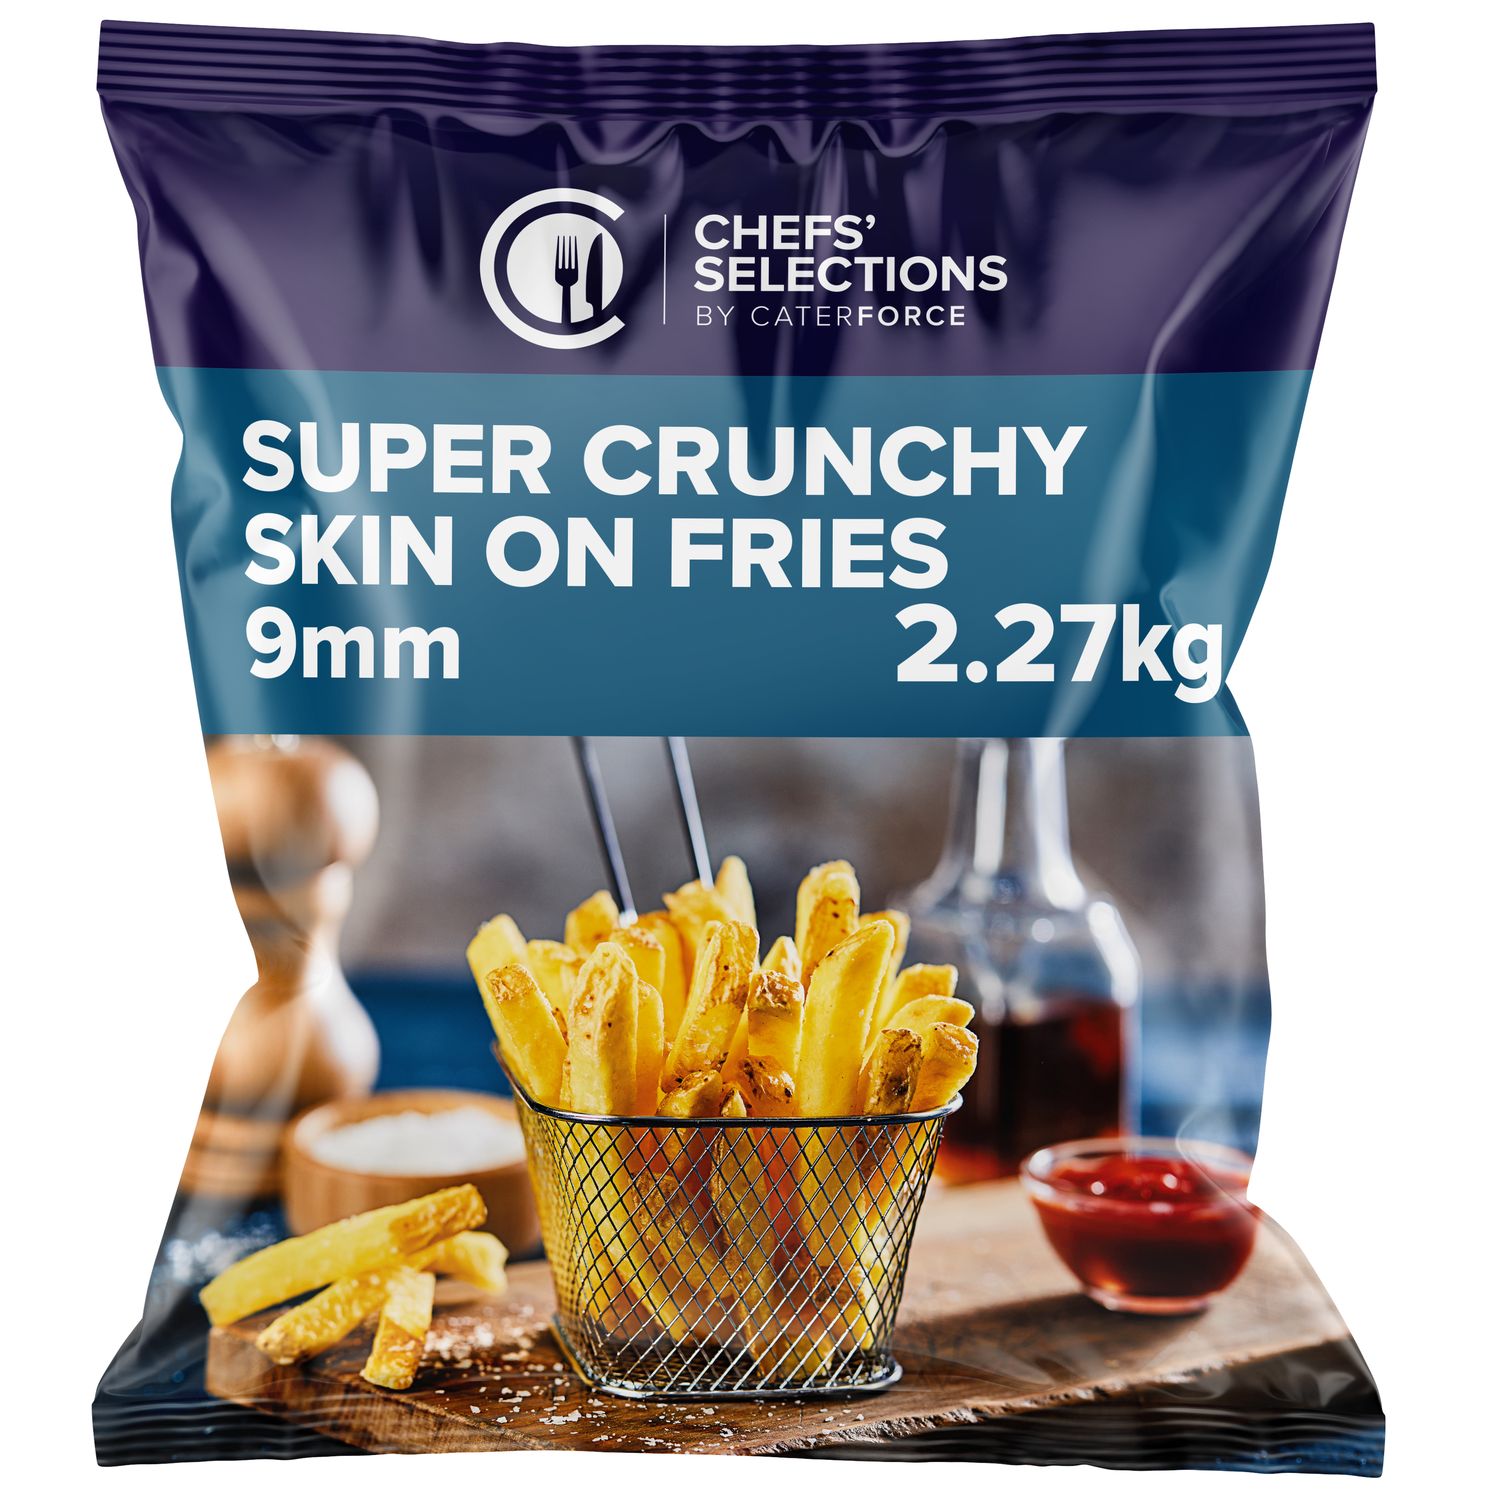 Chefs’ Selections Super Crunchy Skin-on Fries 9mm (4 x 2.27kg)